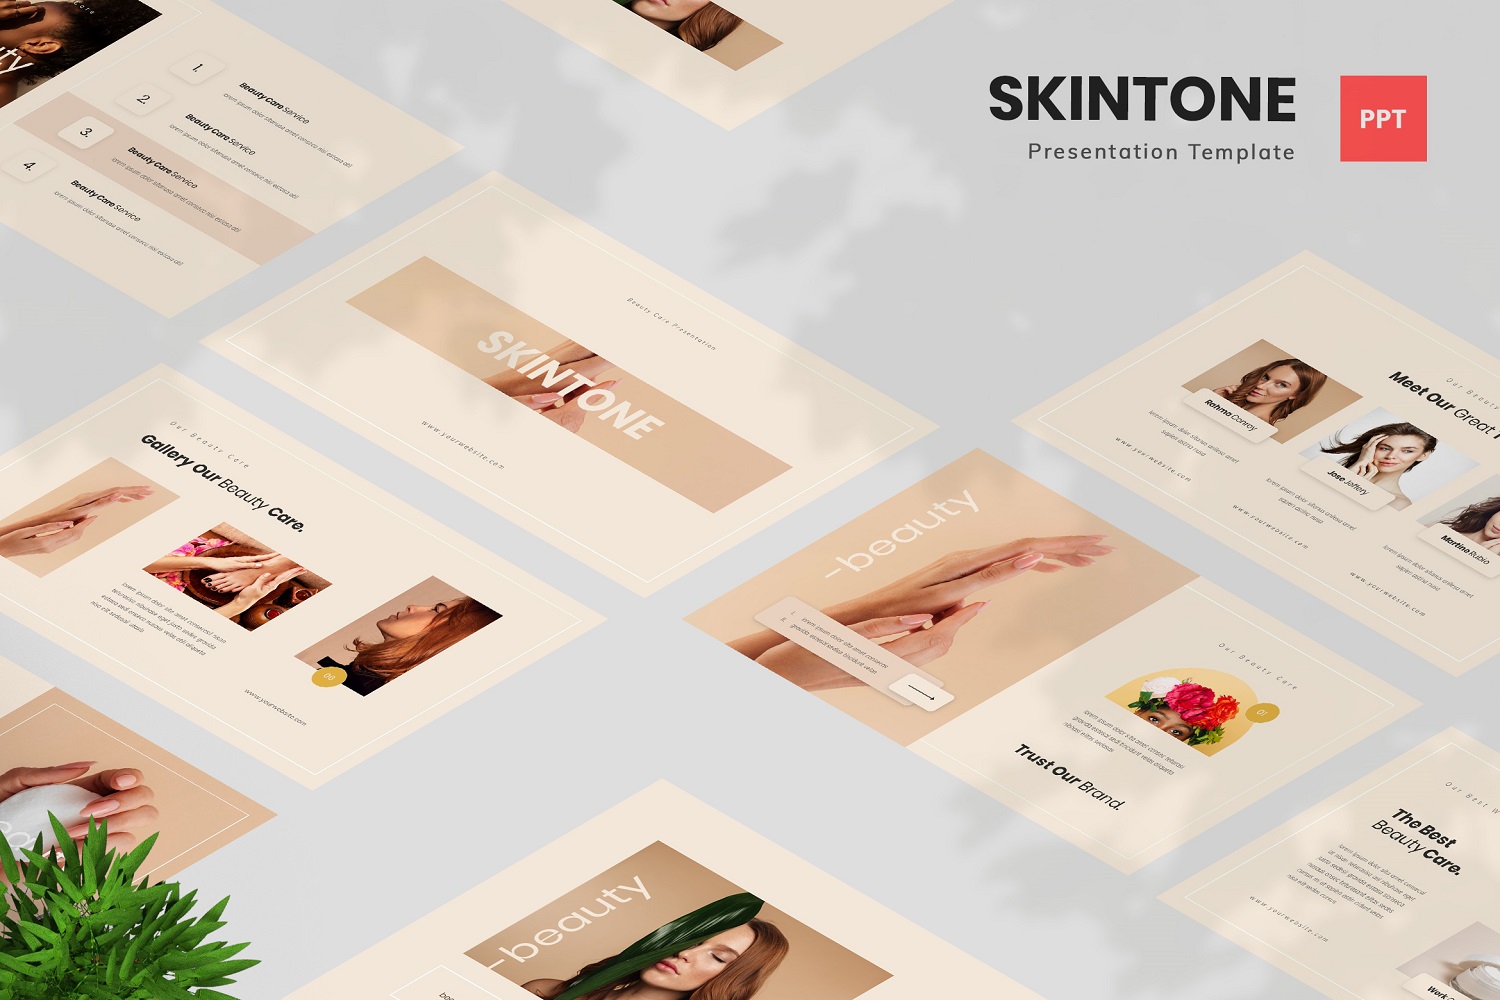 Skintone - Beauty Care Powerpoint Template